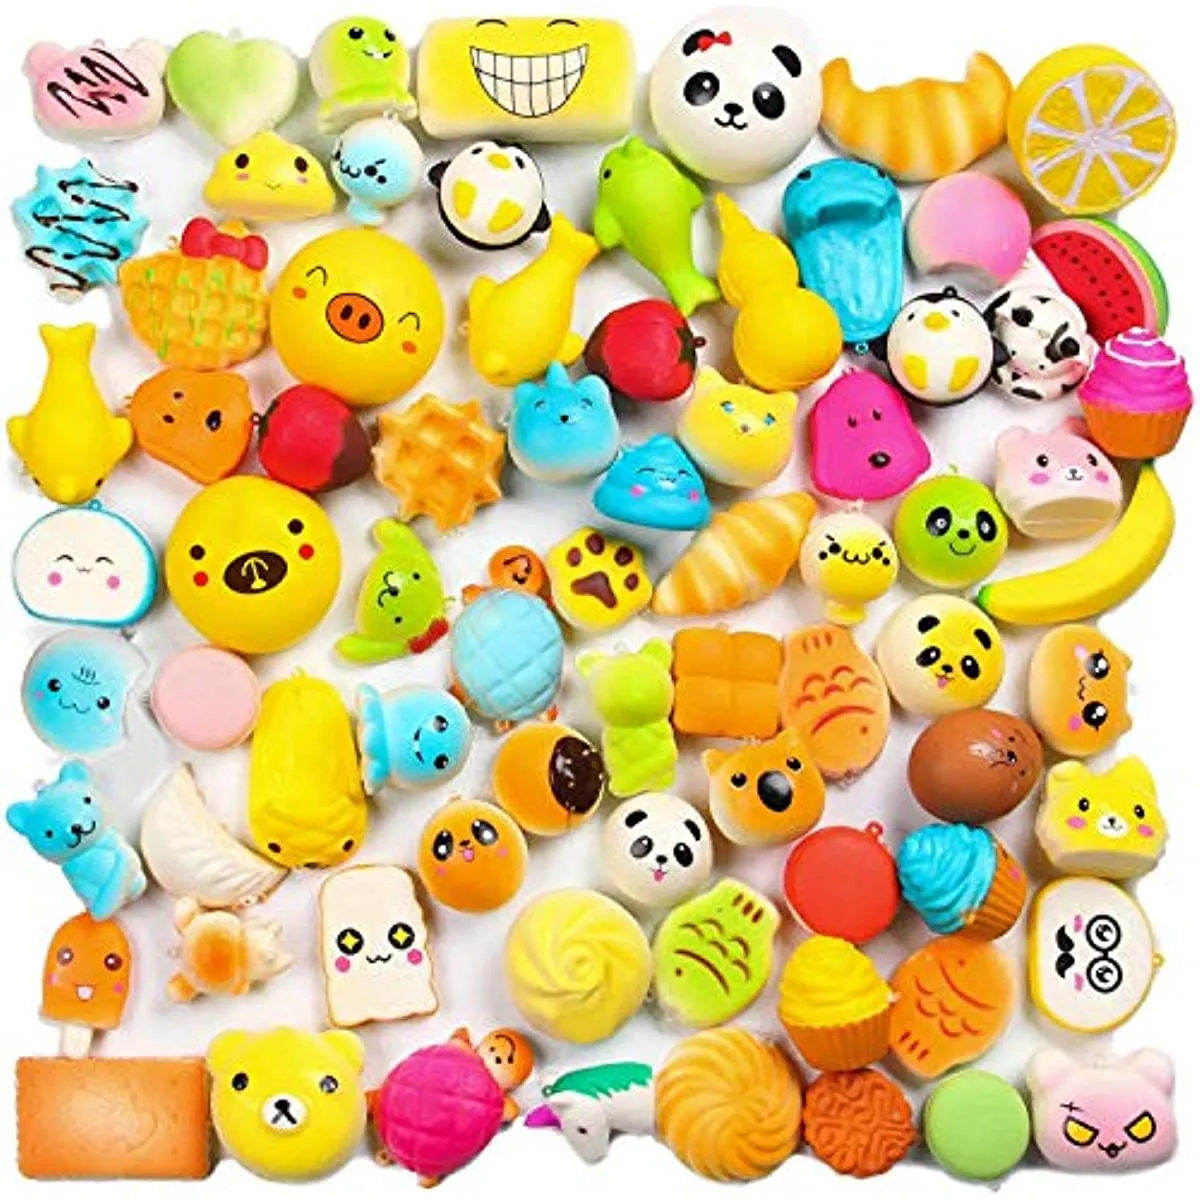 Random 30pcs Squeeze Toys Cream Scented Slow Rising Kawaii Squeeze Toys Medium Mini Size Simulation Lovely Toy Phone Straps Goodie Bag Egg Filler